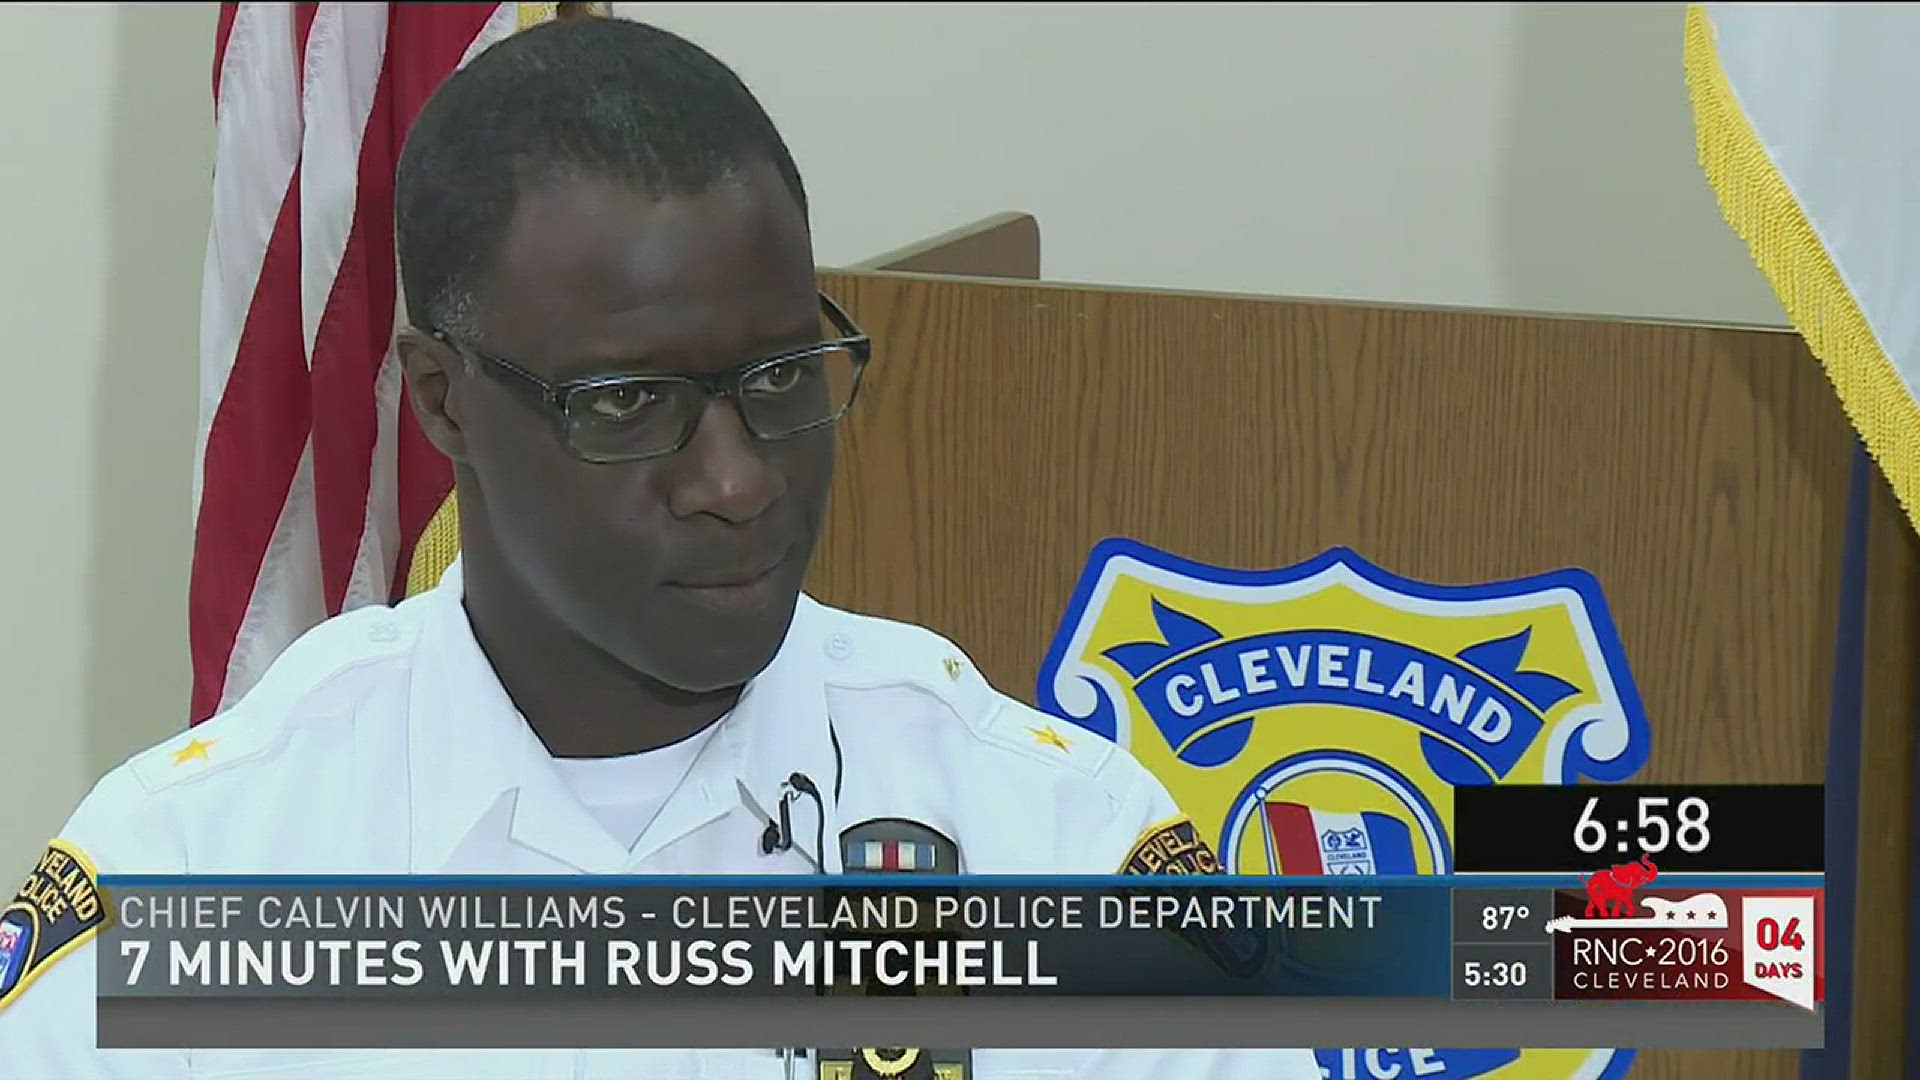 Chief Calvin Williams joins 7 Minutes with Russ Mitchell